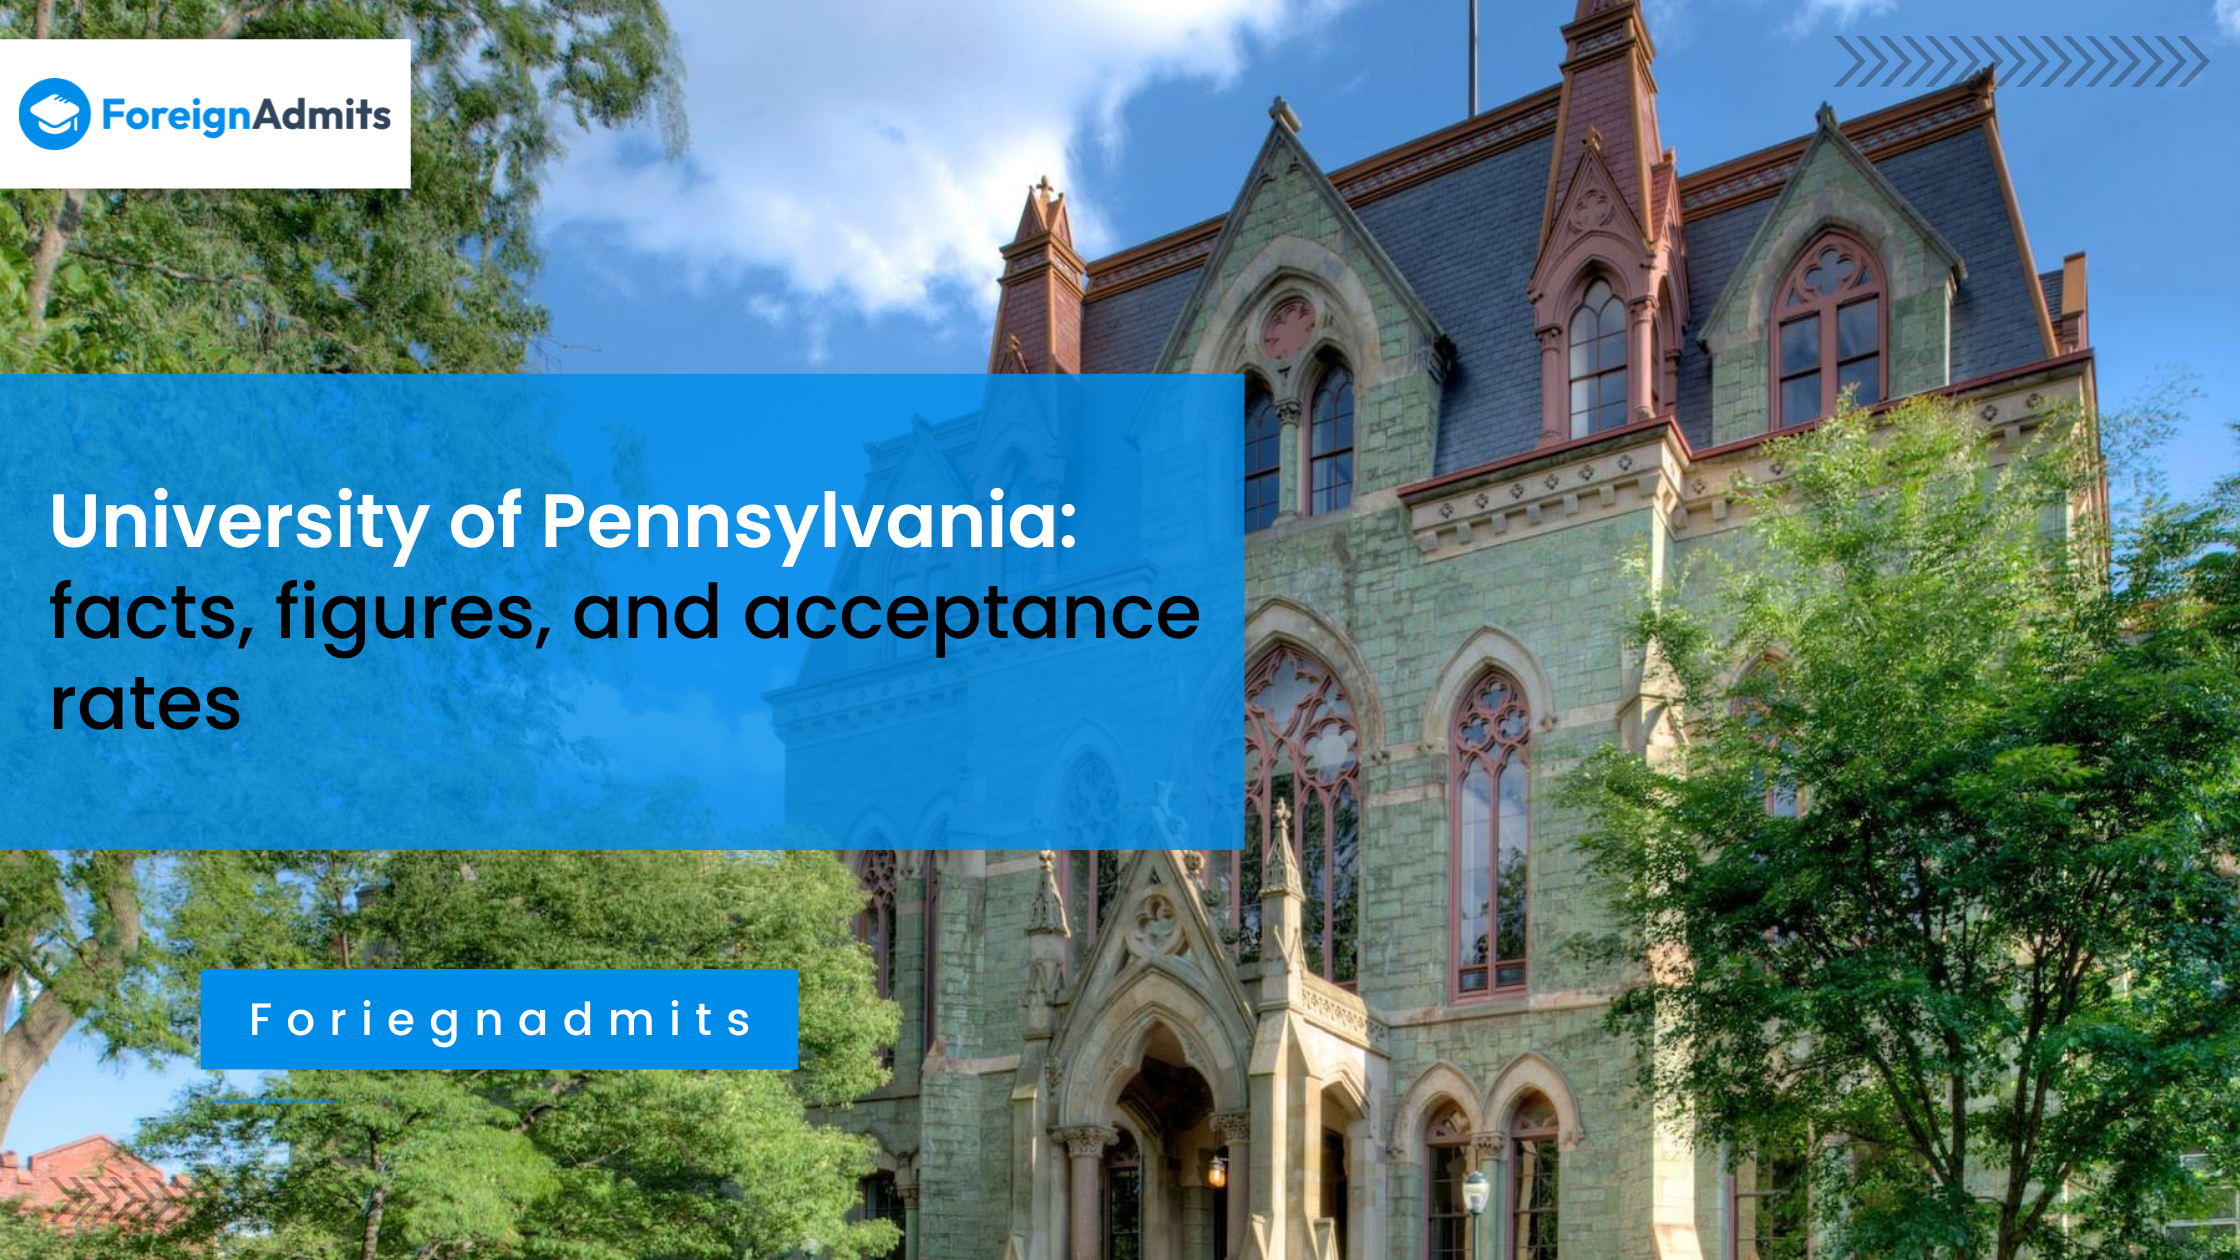 University of Pennsylvania: facts, figures, and acceptance rates